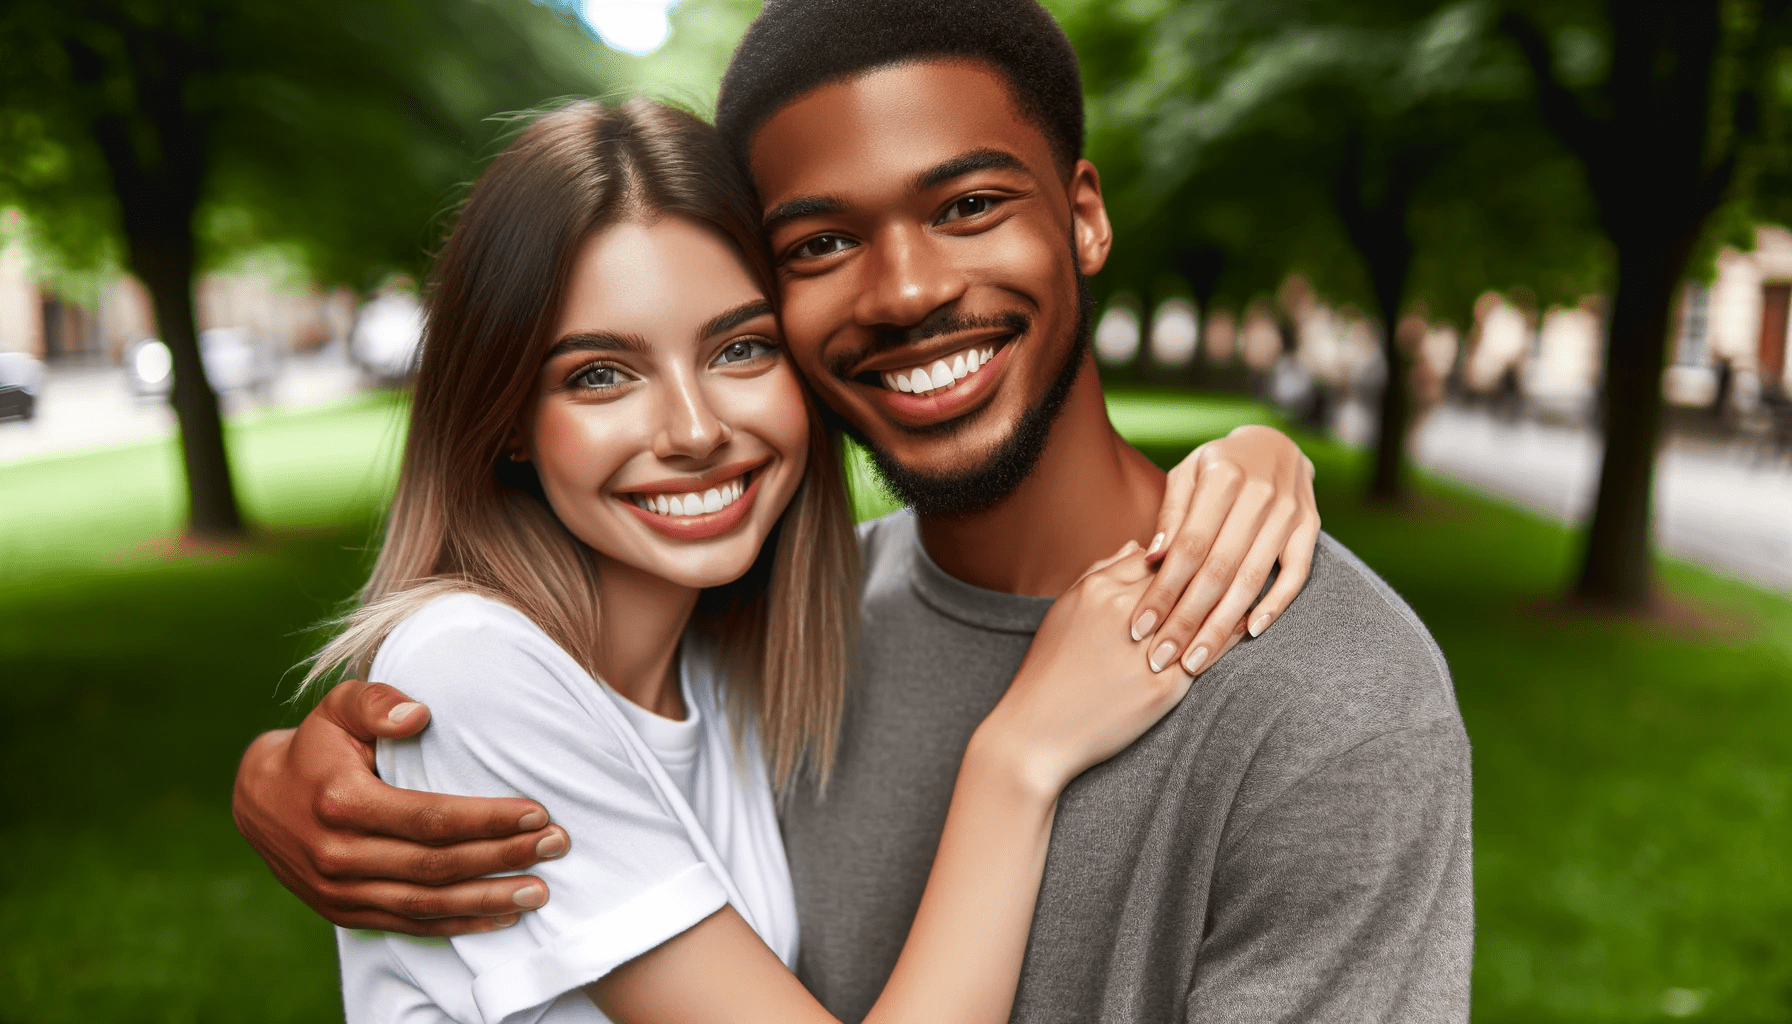 a Black man and a White woman both in their late 20s happily hugging each other in an outdoor park setting. Th